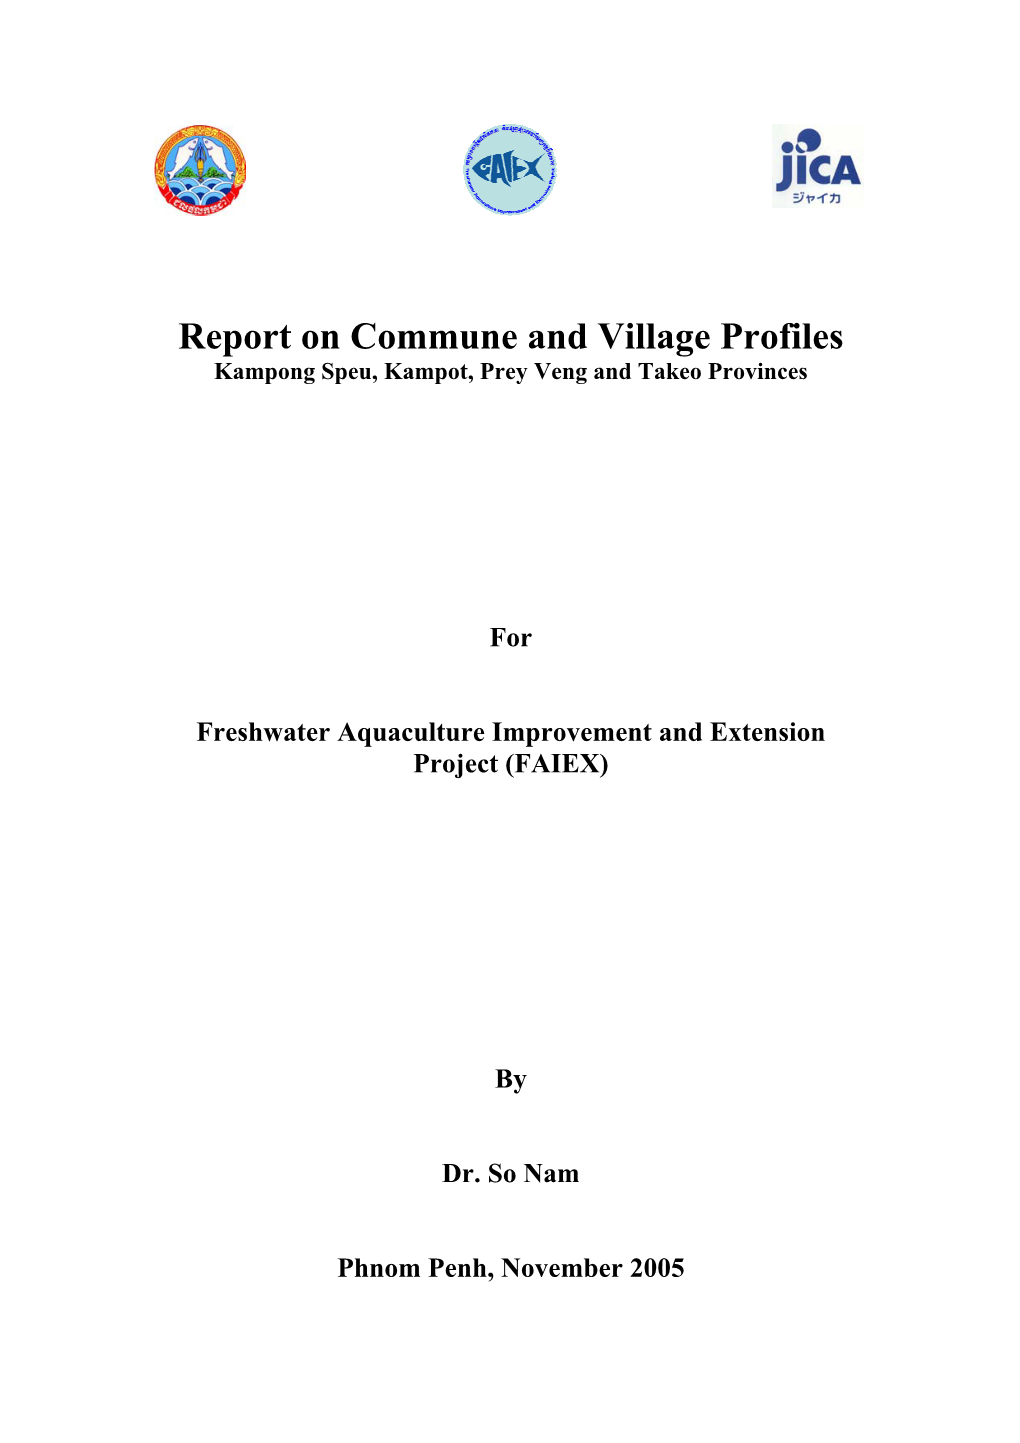 Report on Commune and Village Profiles Kampong Speu, Kampot, Prey Veng and Takeo Provinces